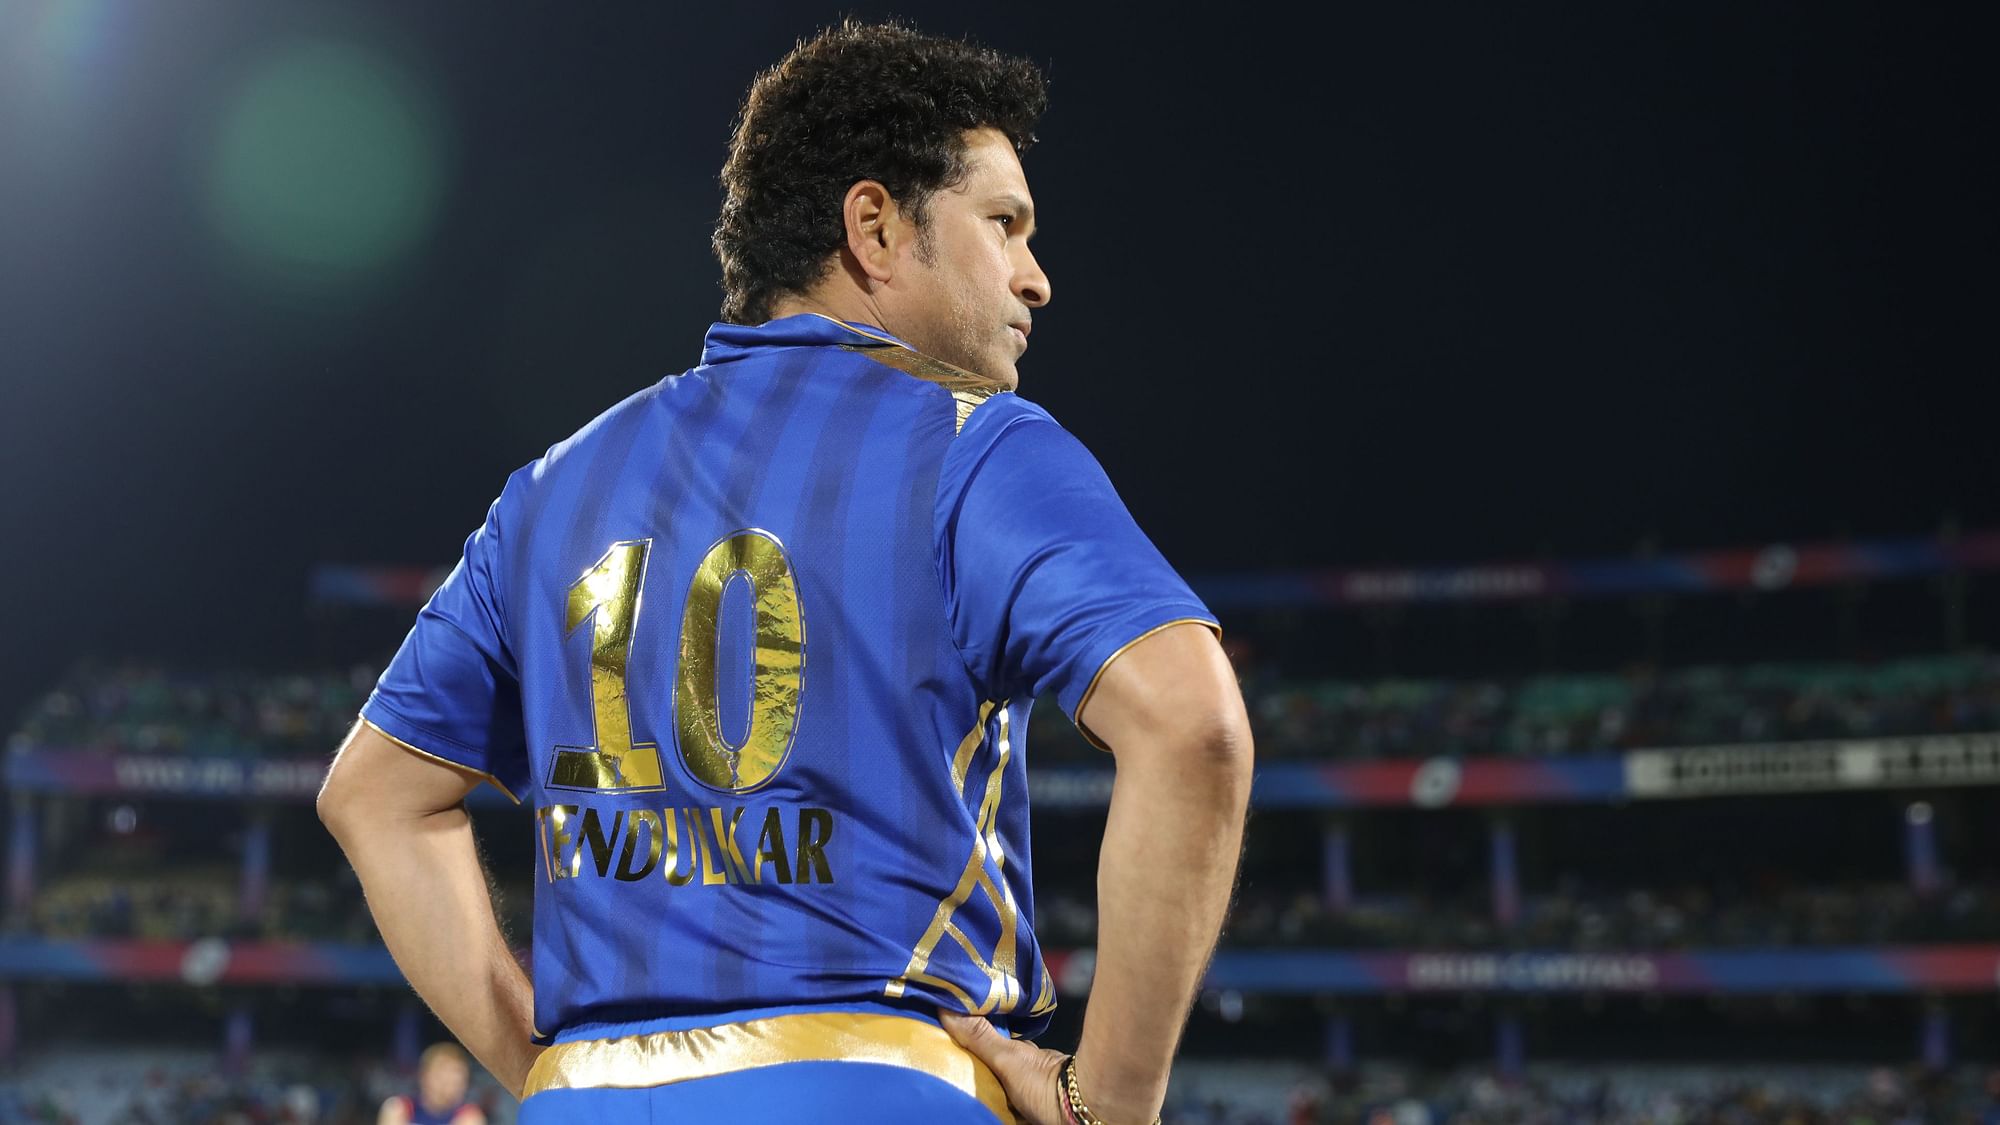 Sachin Tendulkar has no doubts as to which team he is supporting this season in the Indian Premier League (IPL).